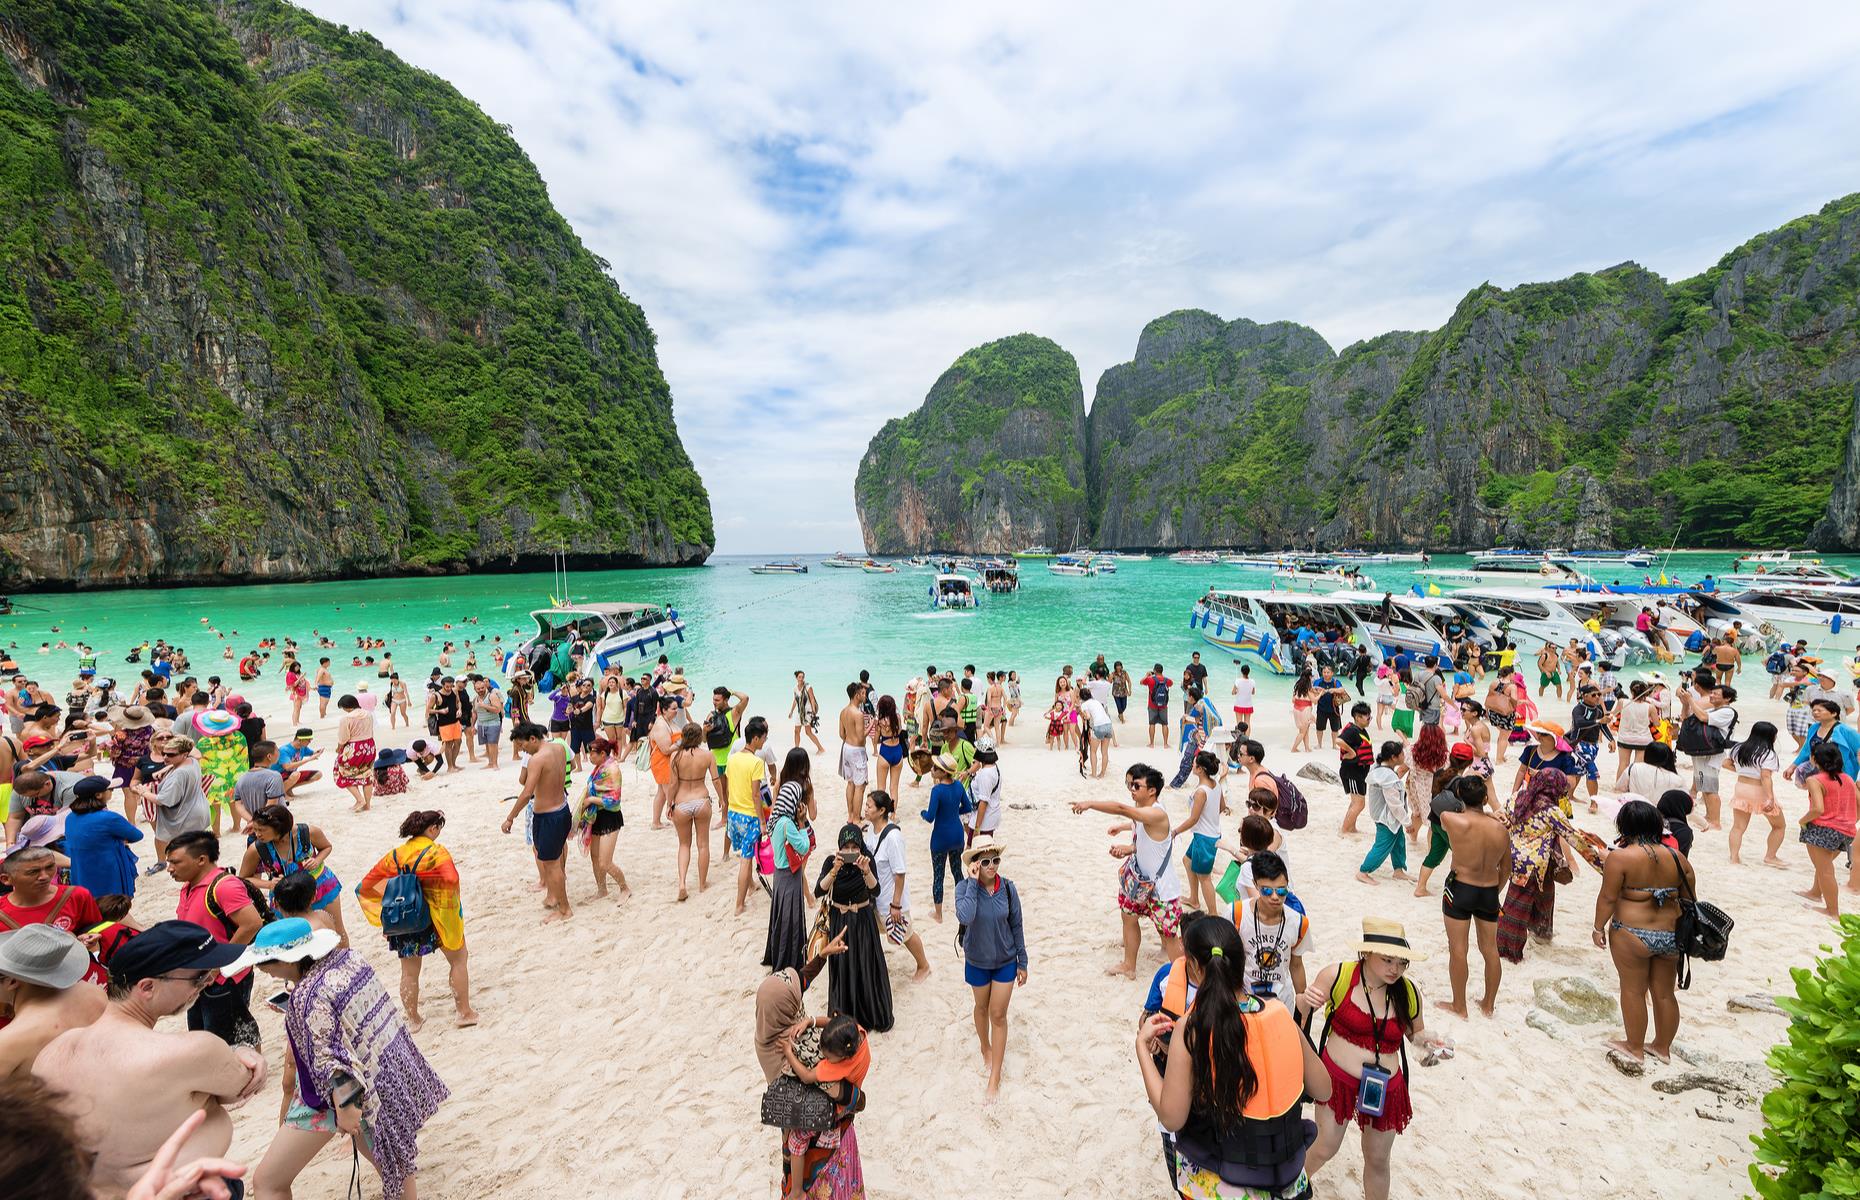 Hordes of tourists, hard-talking boat trip vendors and piles of rubbish have made this beauty spot anything but a paradise. The victim of its own popularity, Koh Phi Phi has been critically damaged from overtourism. The beach was closed for an extended period for clean-up efforts, before reopening in 2022. It has just reopened after another three-month closure.